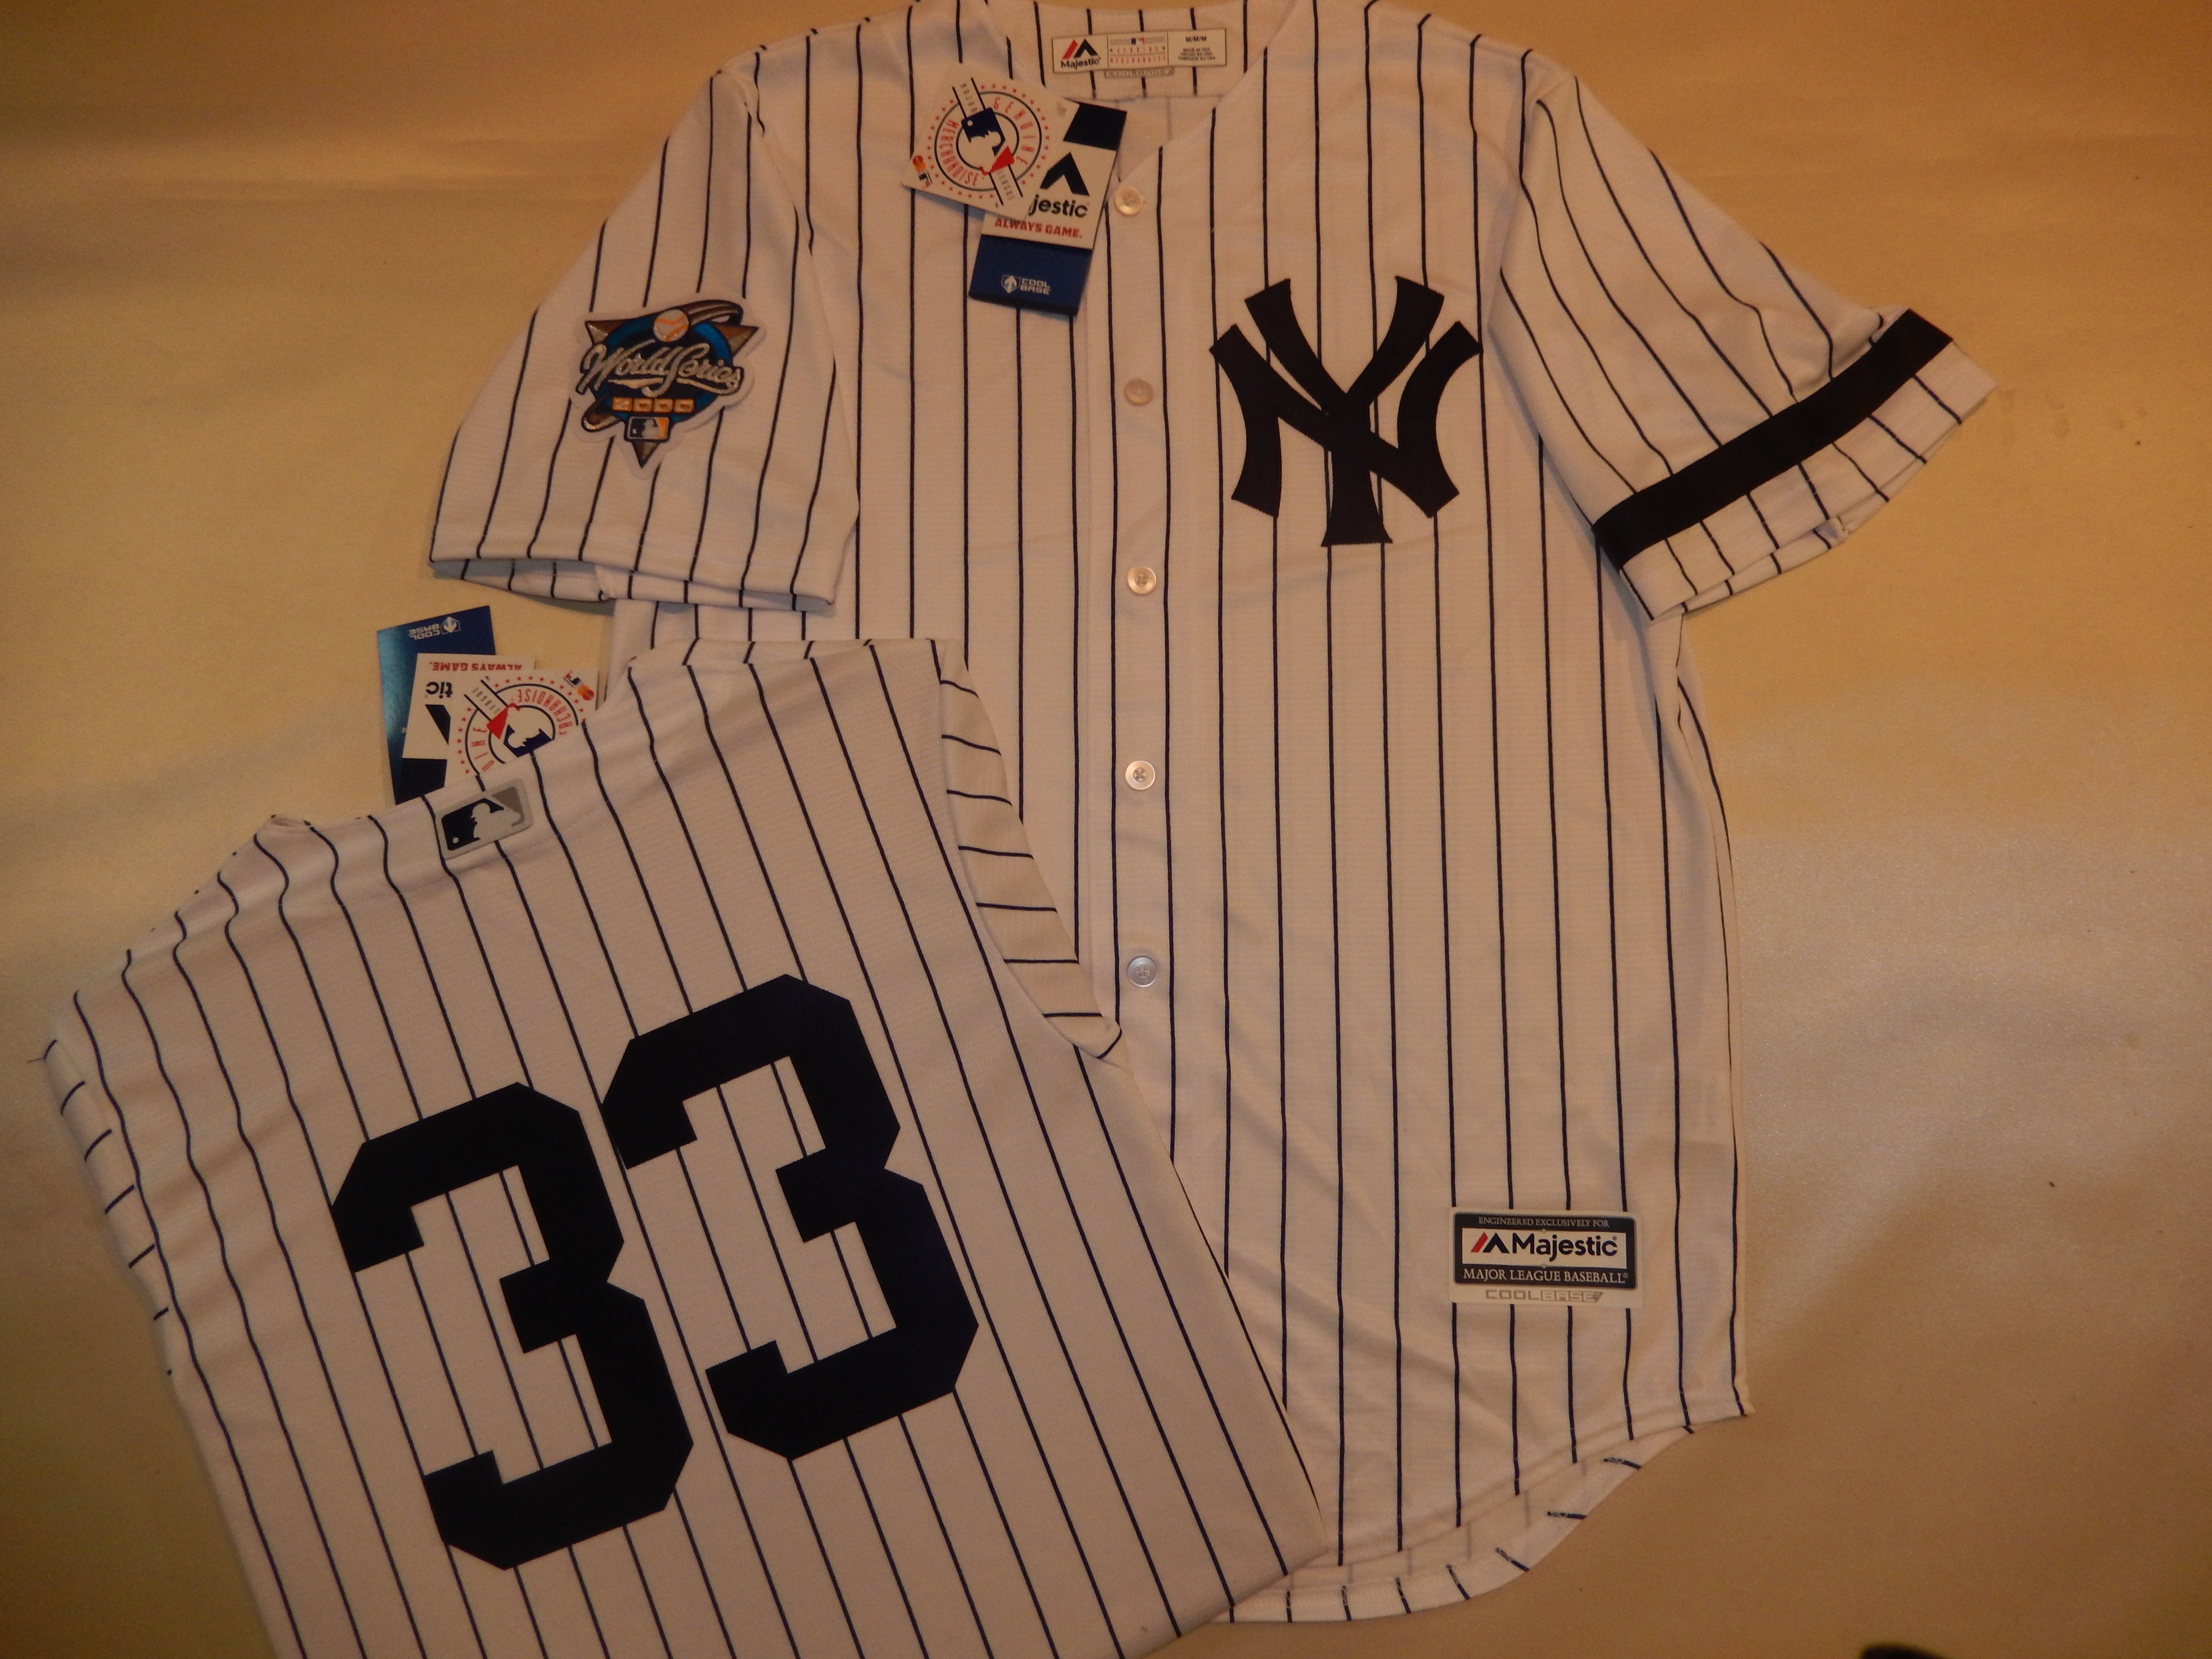 canseco jersey